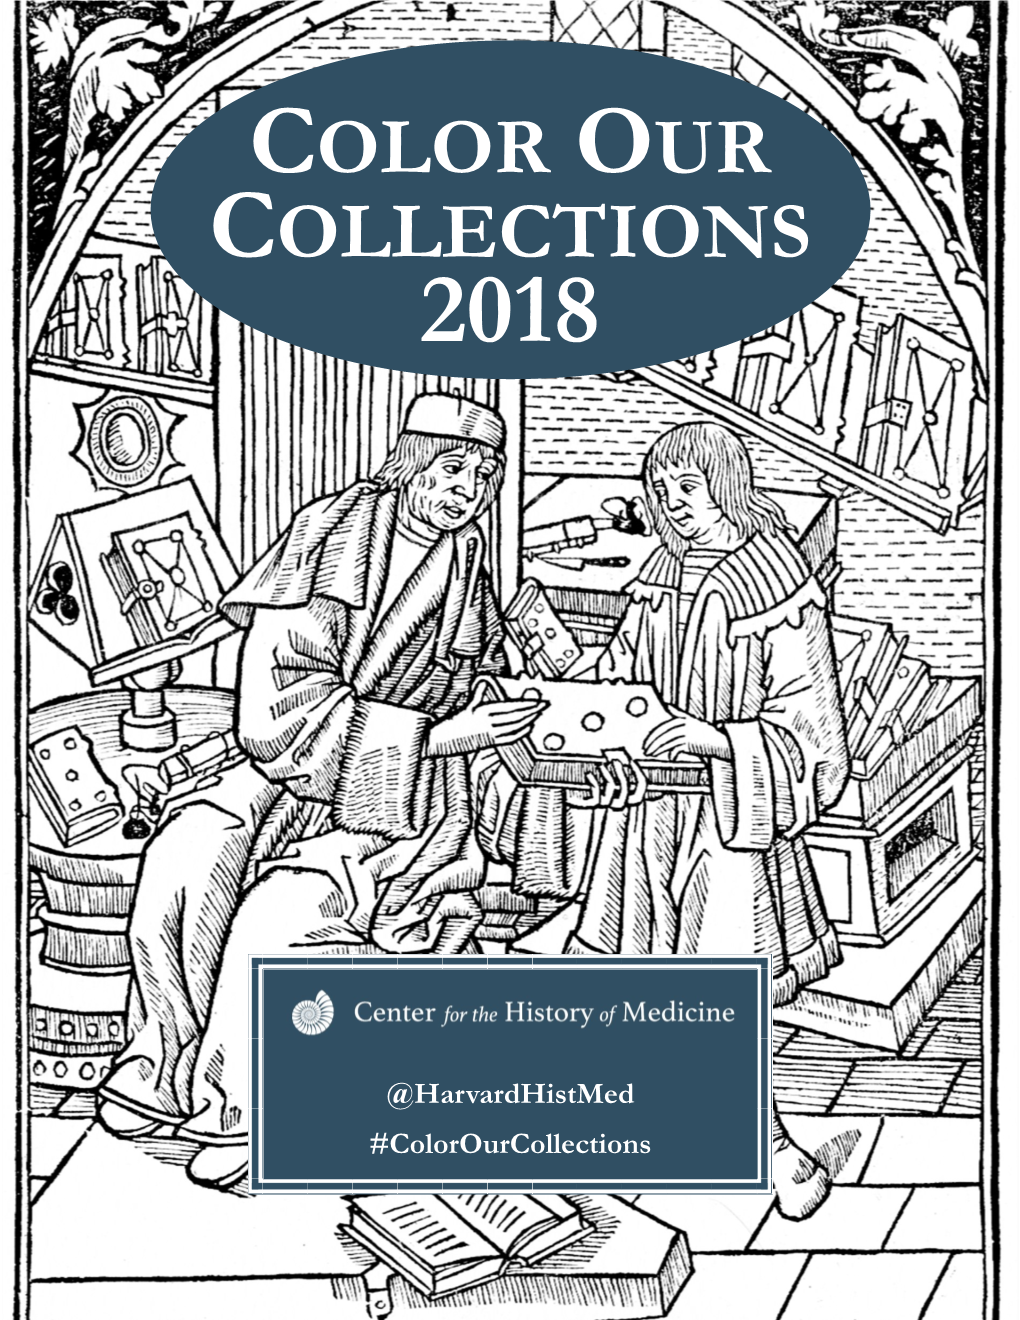 Center for the History of Medicine, Countway Library Coloring Book